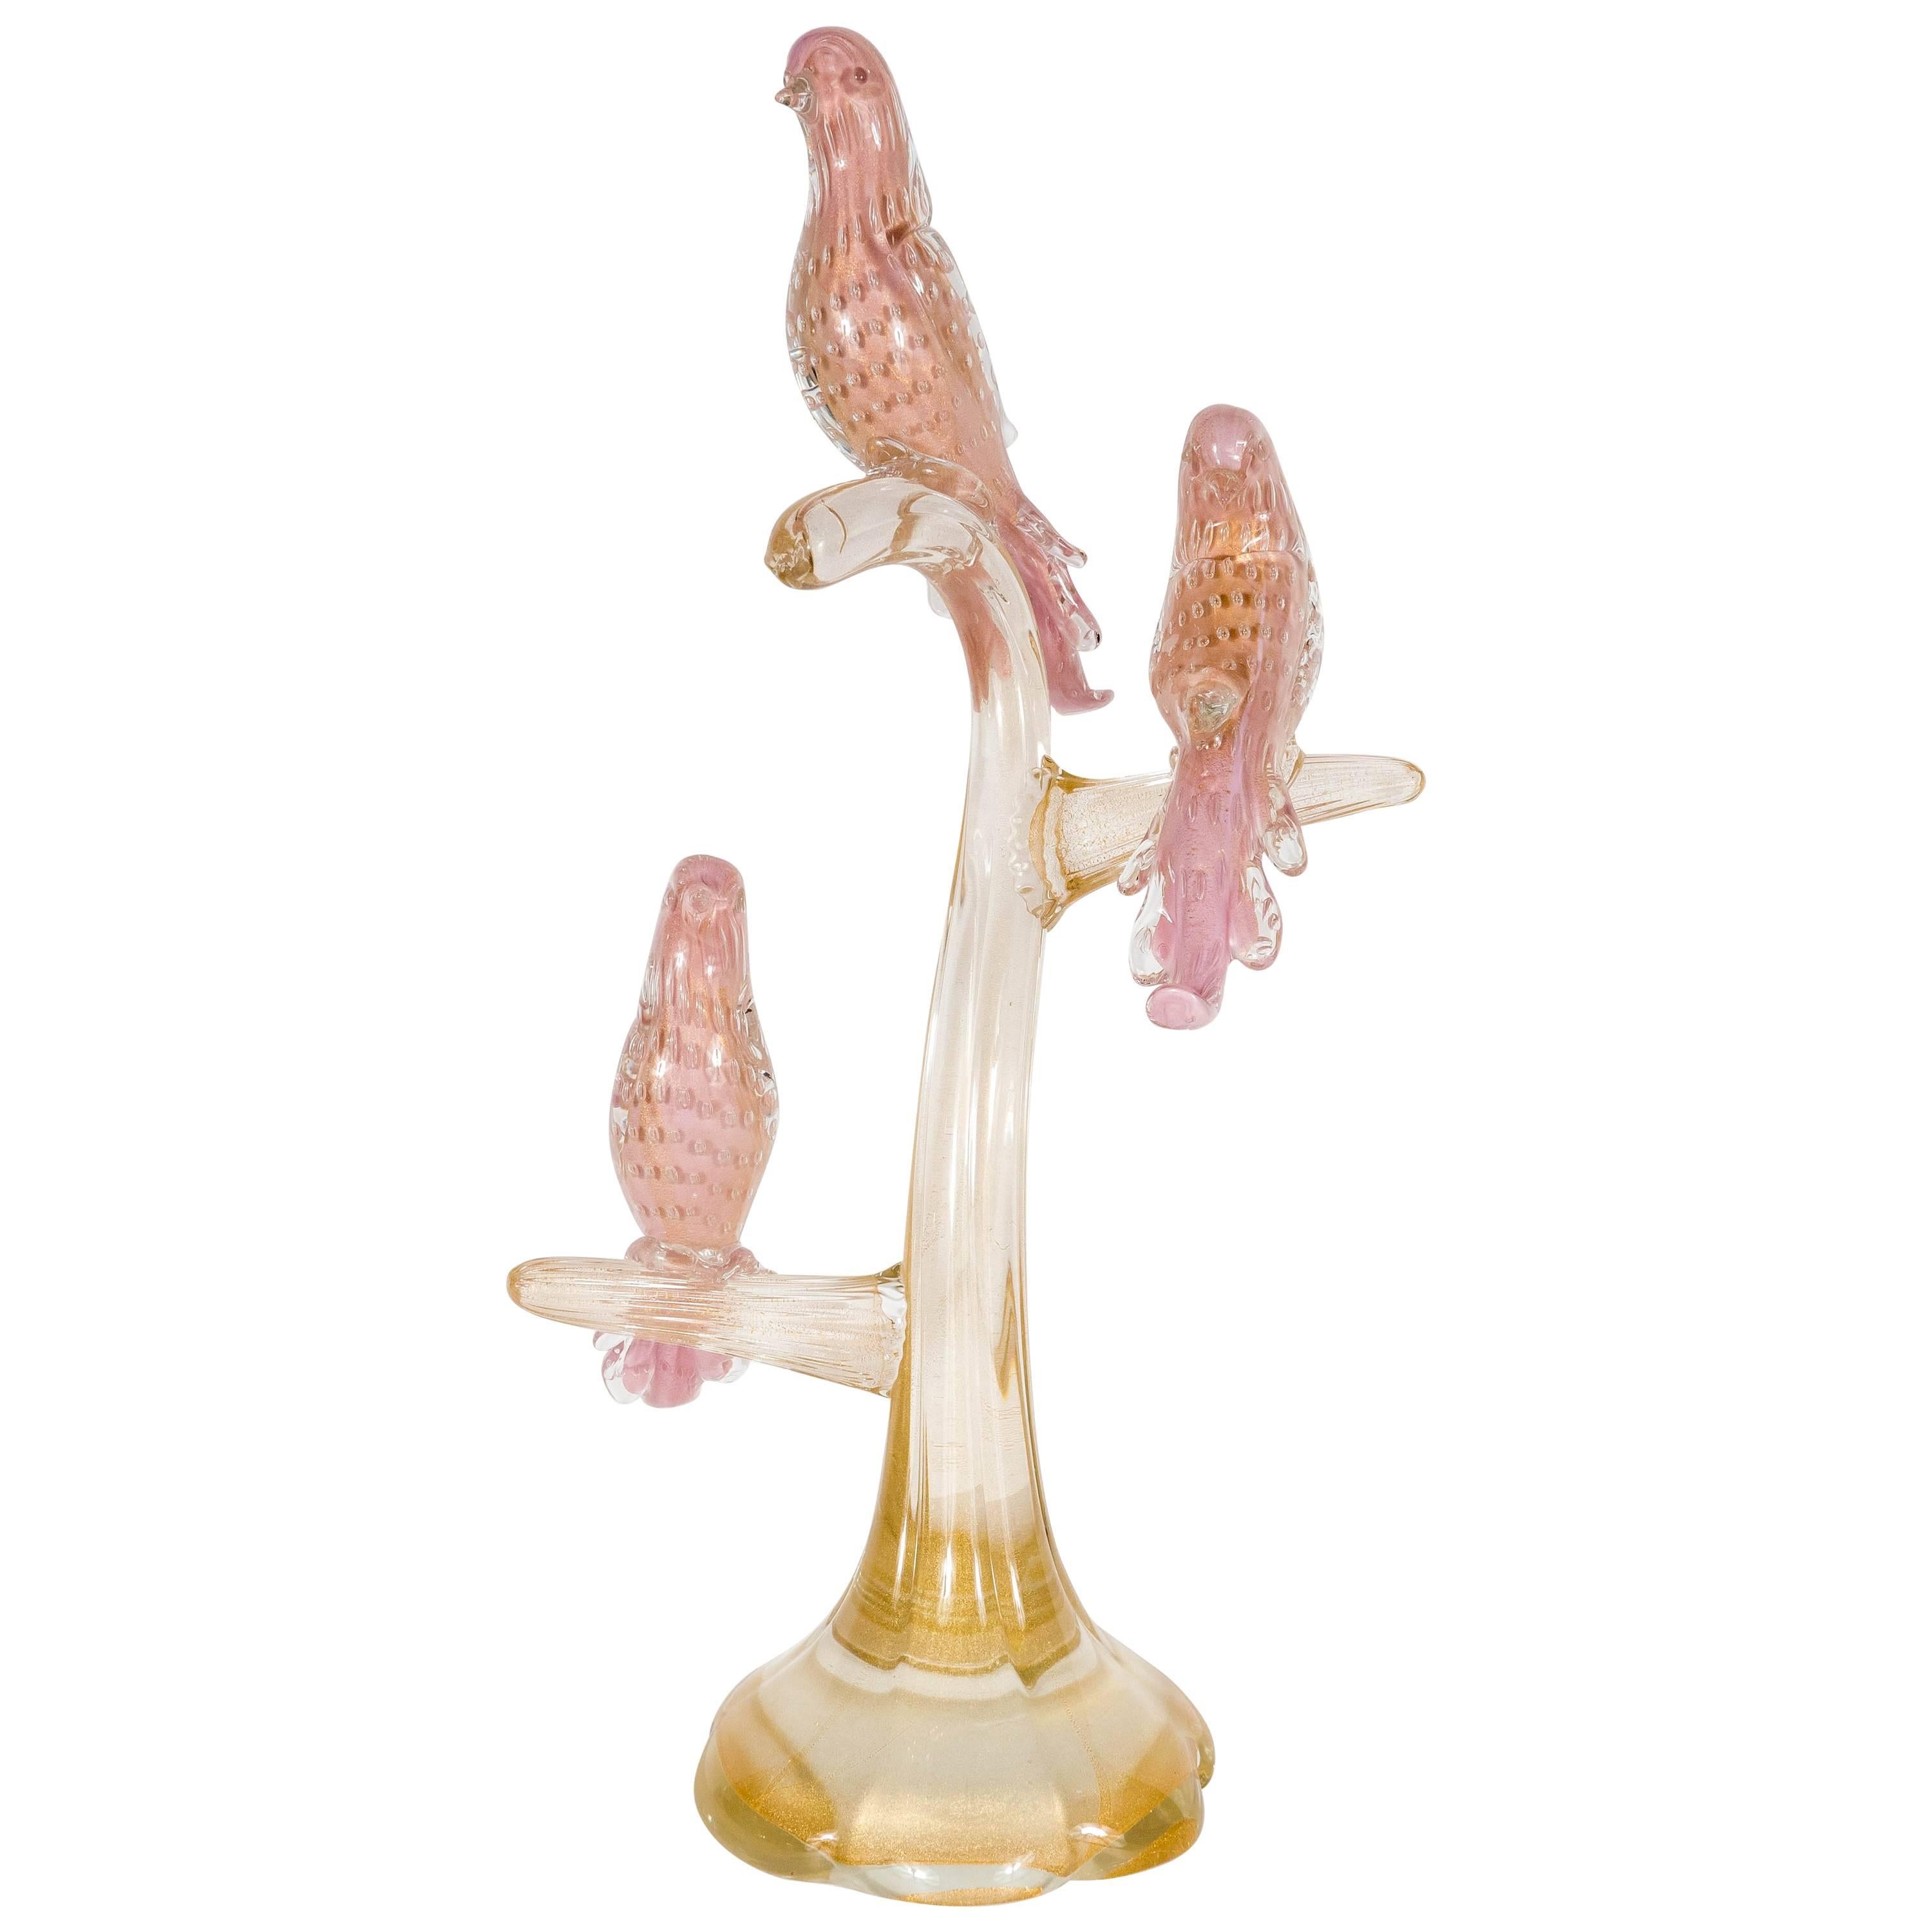 Midcentury Murano Glass Sculpture of Three Birds on a Branch